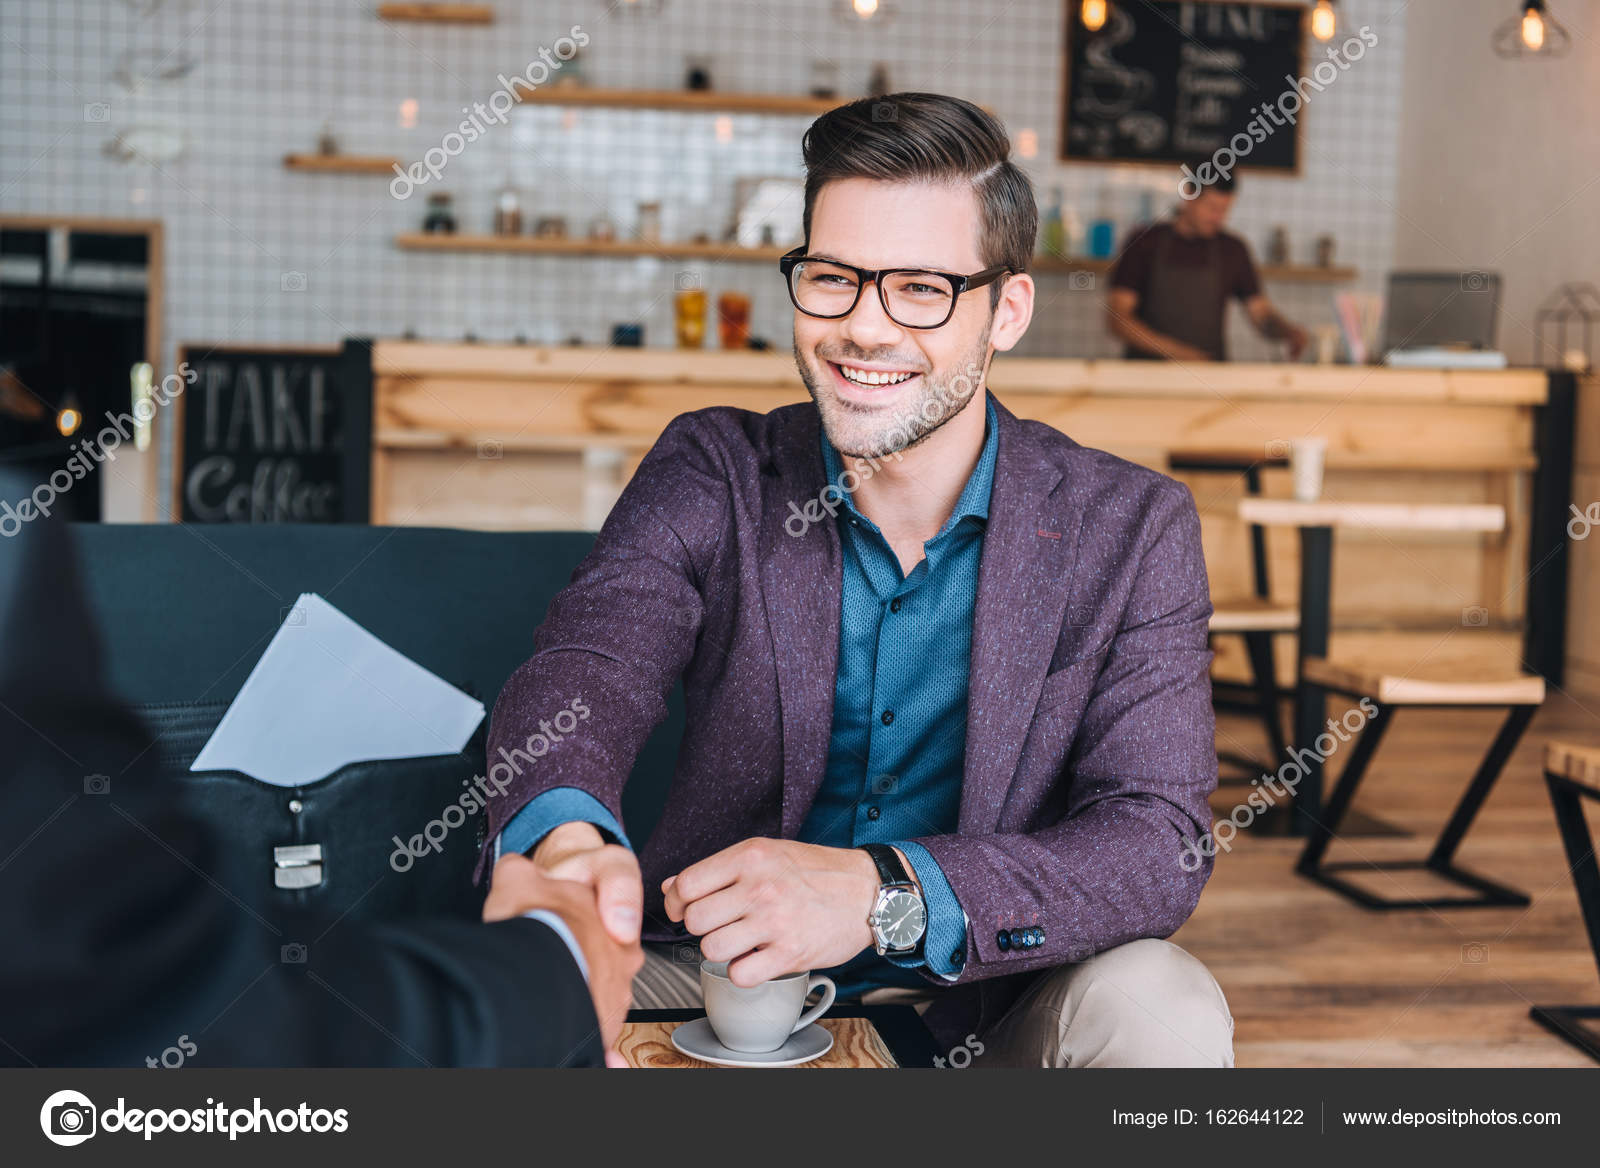 Businessmen shaking hands in cafe — Stock Photo © AlexLipa #162644122